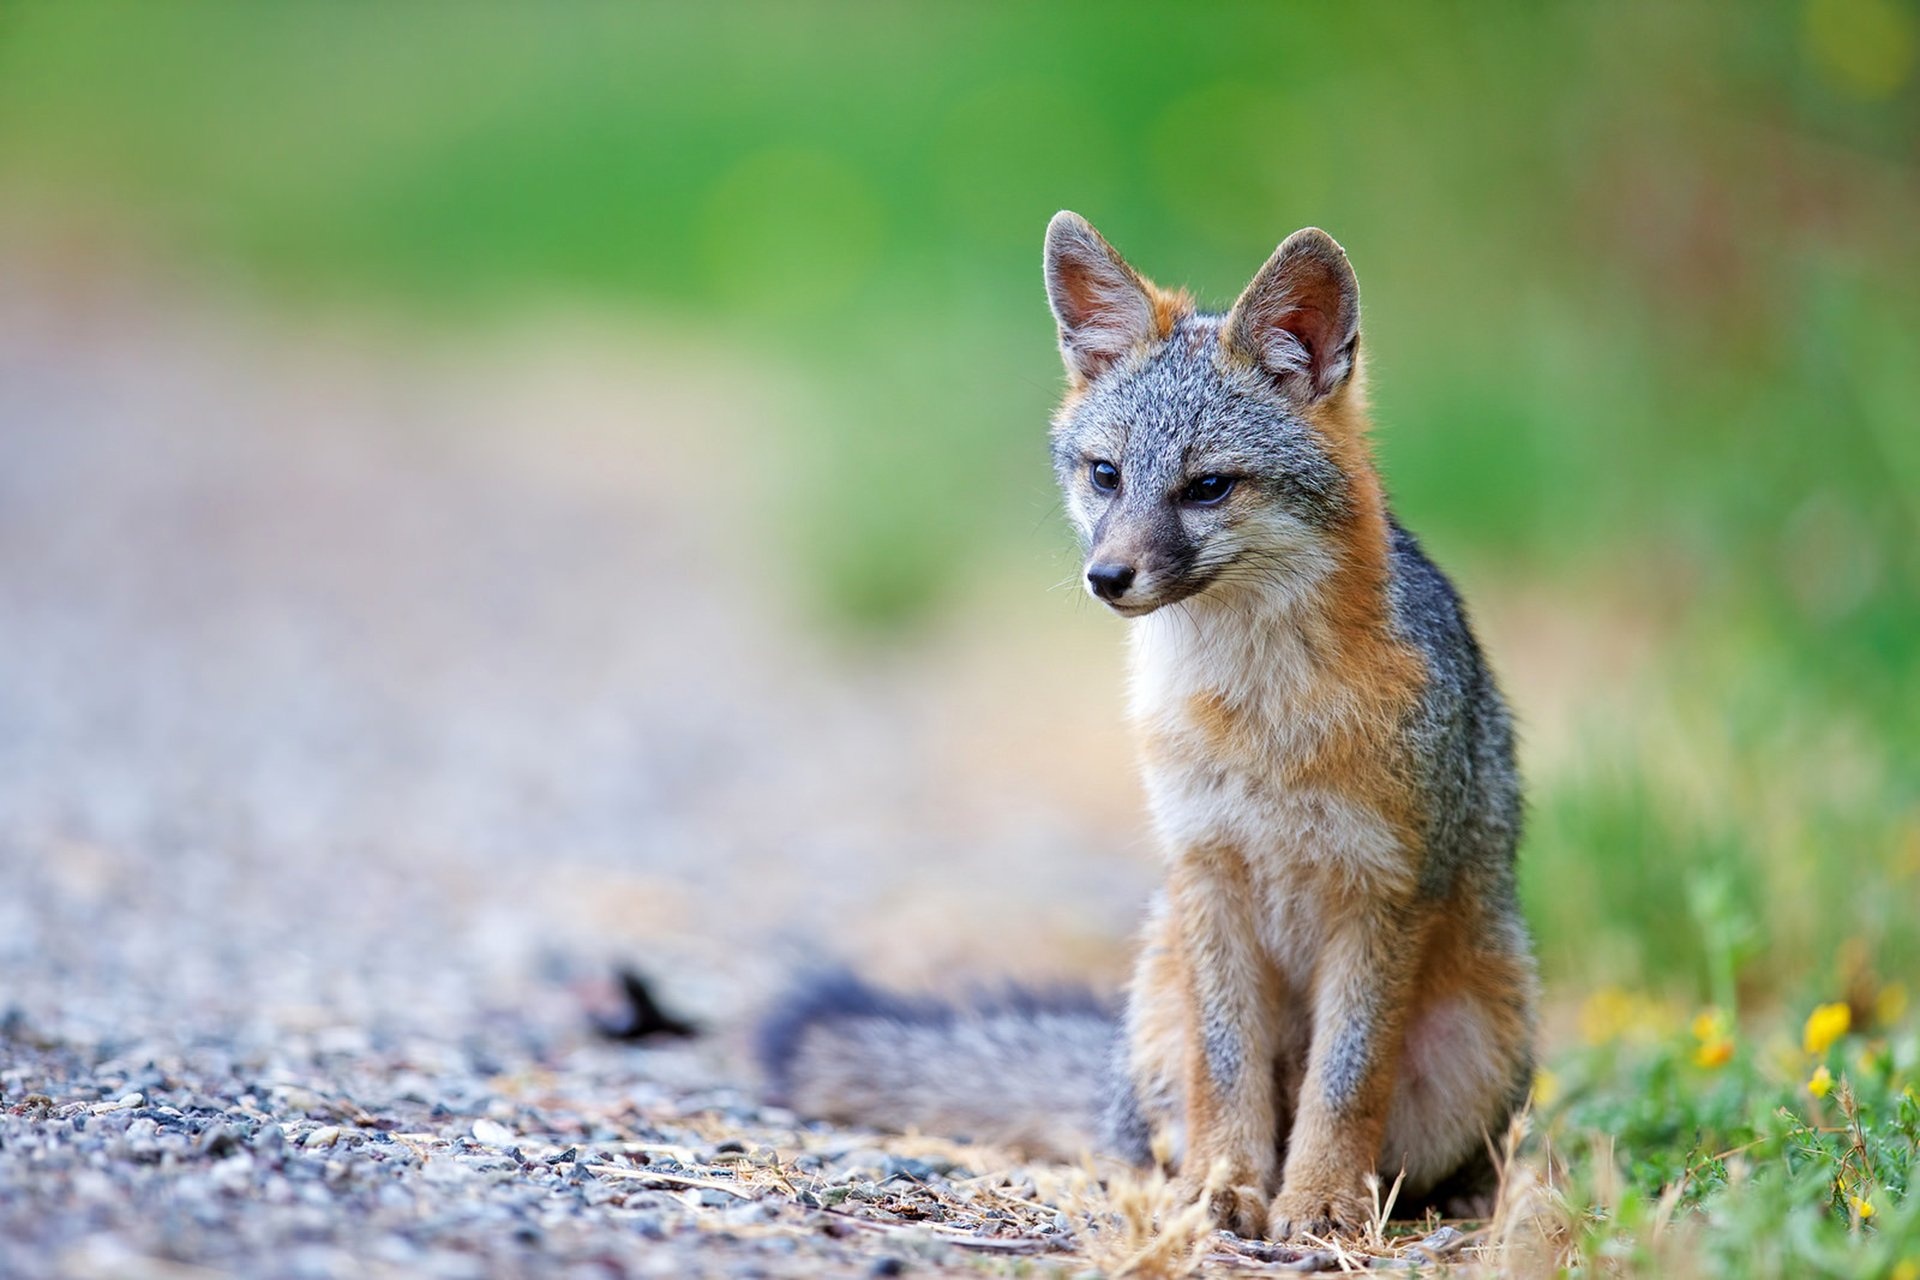 Gray Fox: A mammal, Known to raid garbage cans in search of food, Urocyon cinereoargenteus. 1920x1280 HD Wallpaper.